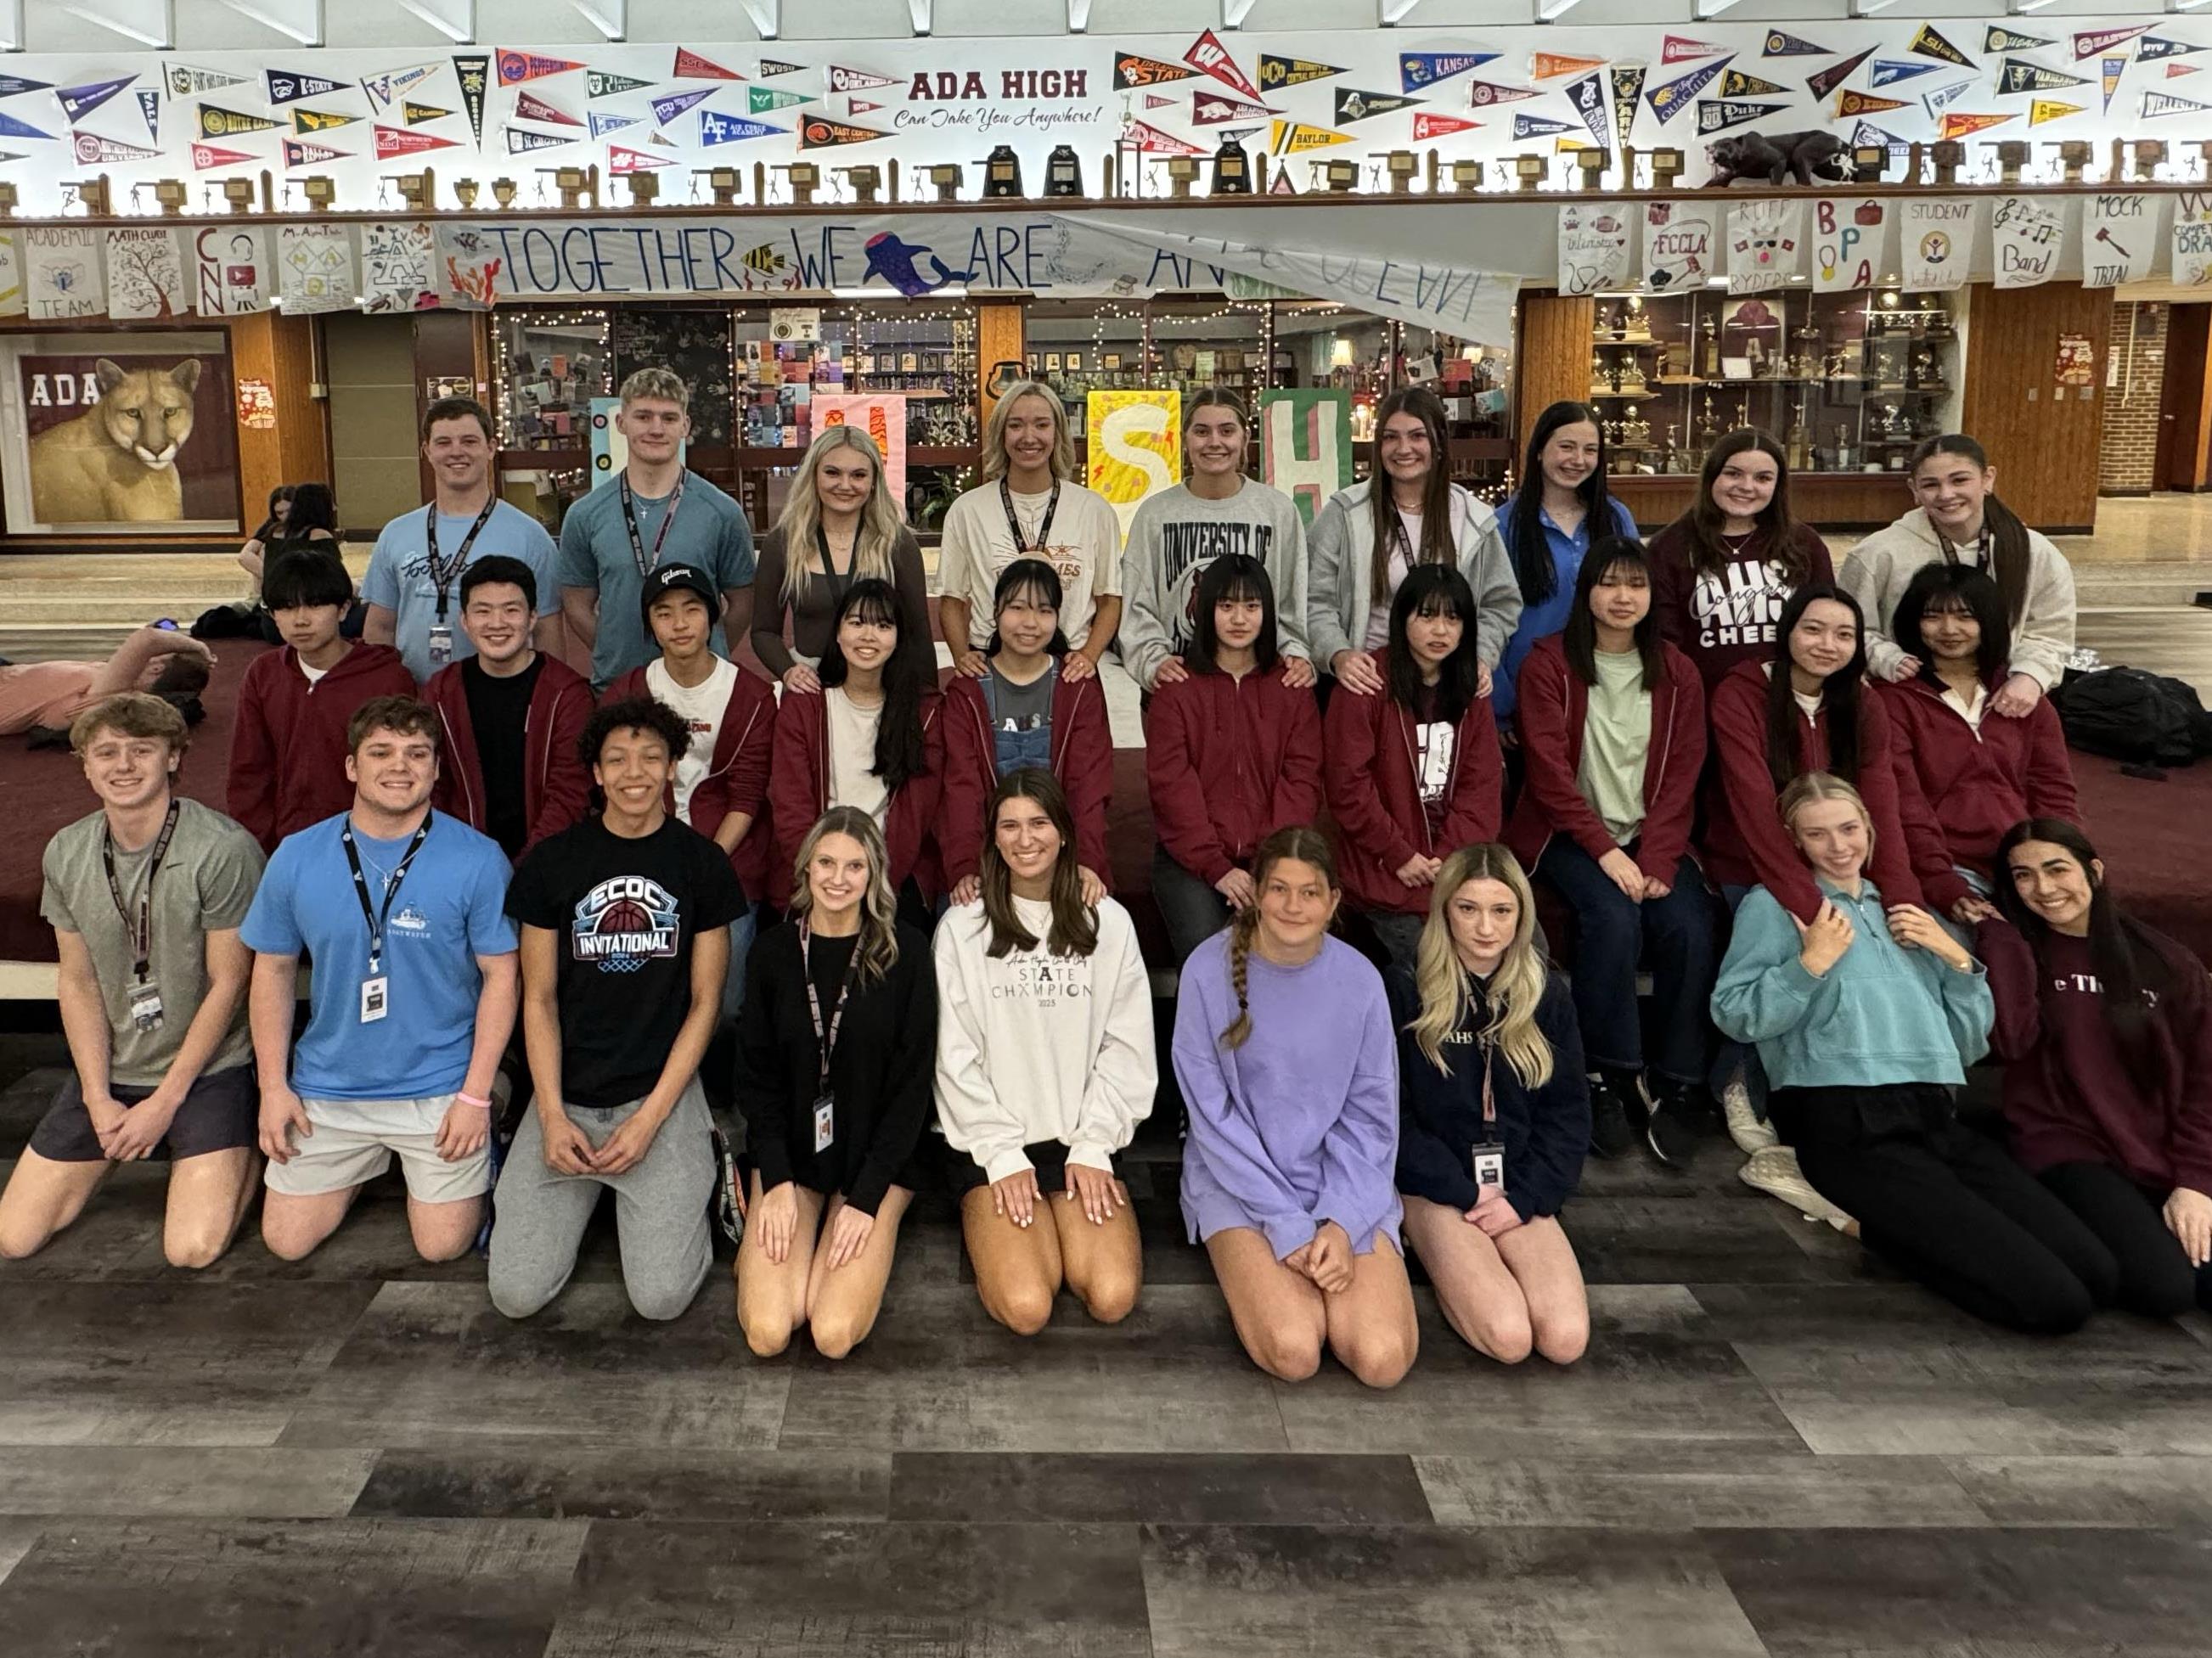 Ada High School students and exchange students from the Ibaraki Christian High School in Japan pose for a group picture.